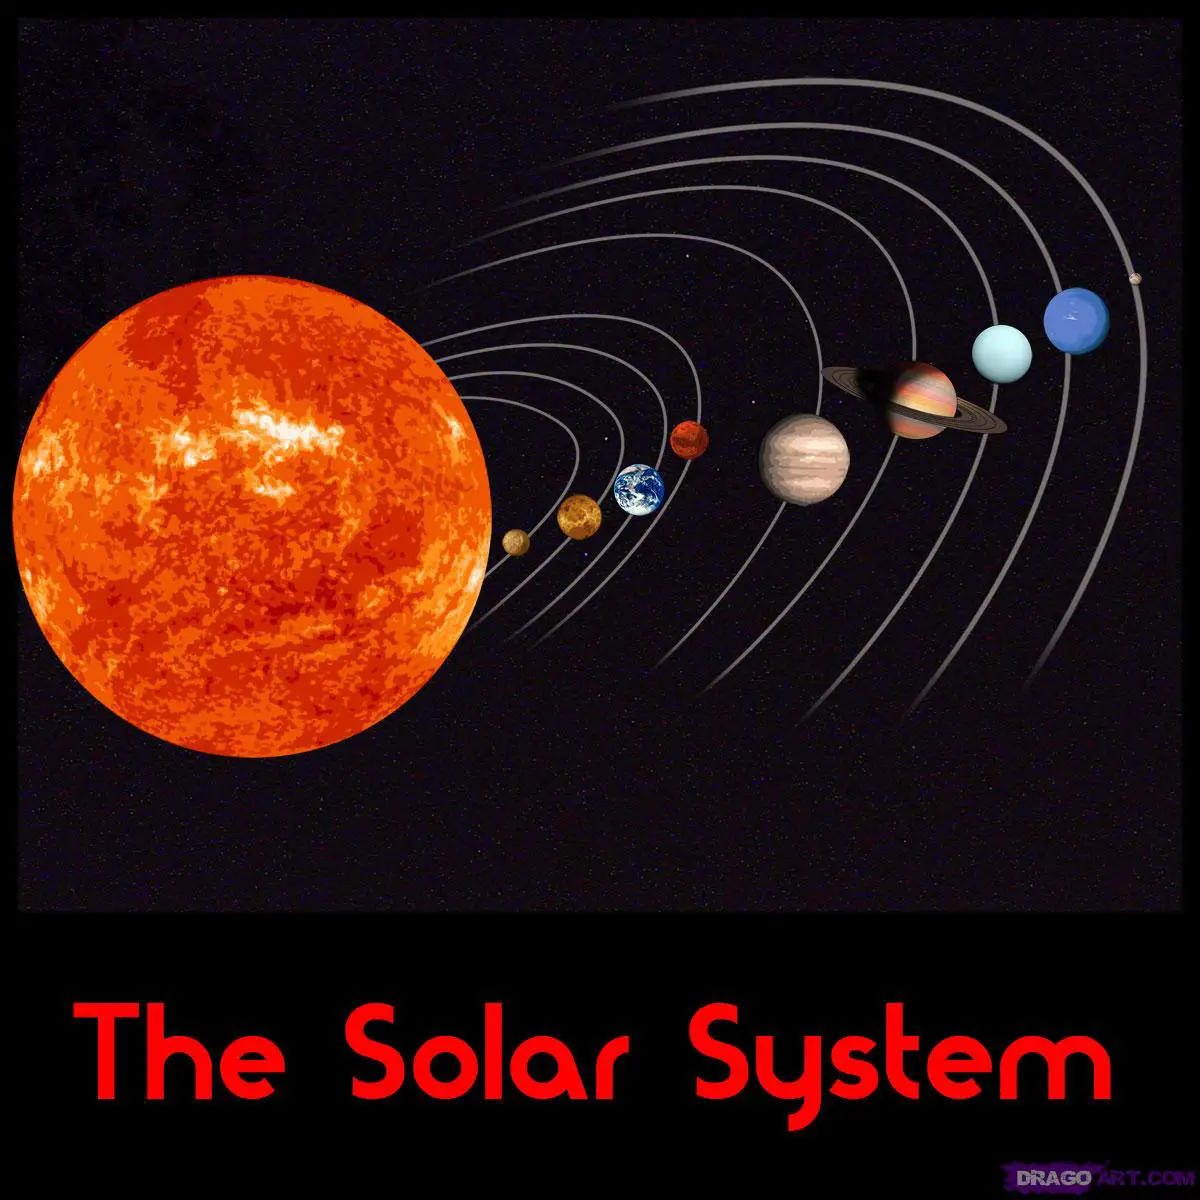 Diagrams of the Solar System